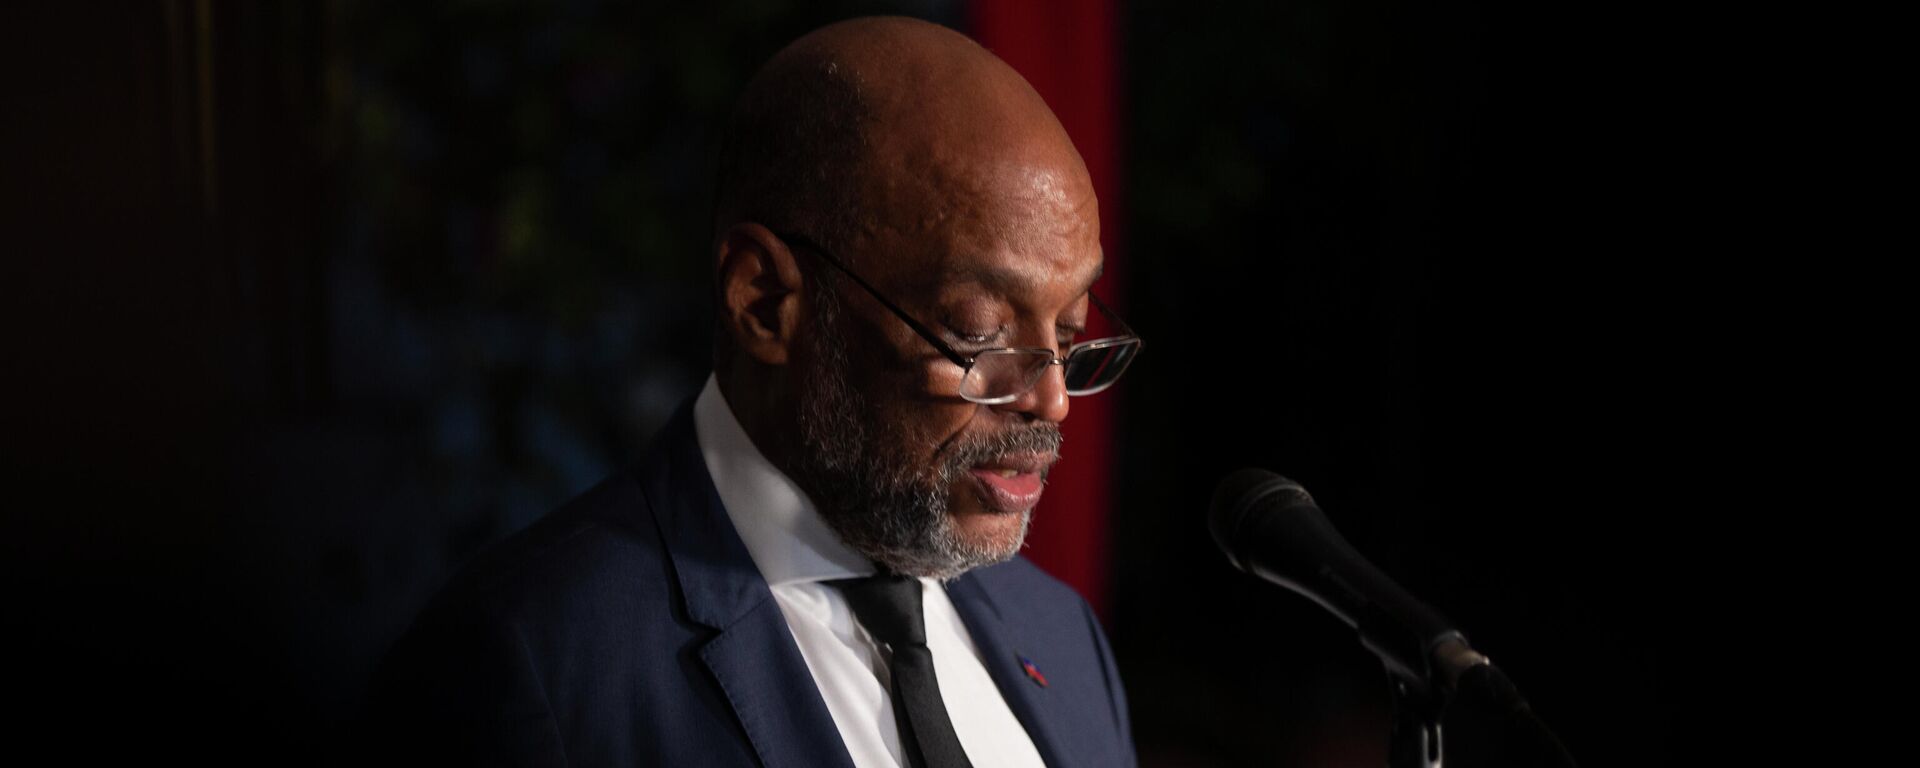 Haiti's Prime Minister Ariel Henry speaks at a ceremony to appoint members of his cabinet, in Port-au-Prince, Haiti, Wednesday, Nov. 24, 2021.  - Sputnik International, 1920, 02.01.2022